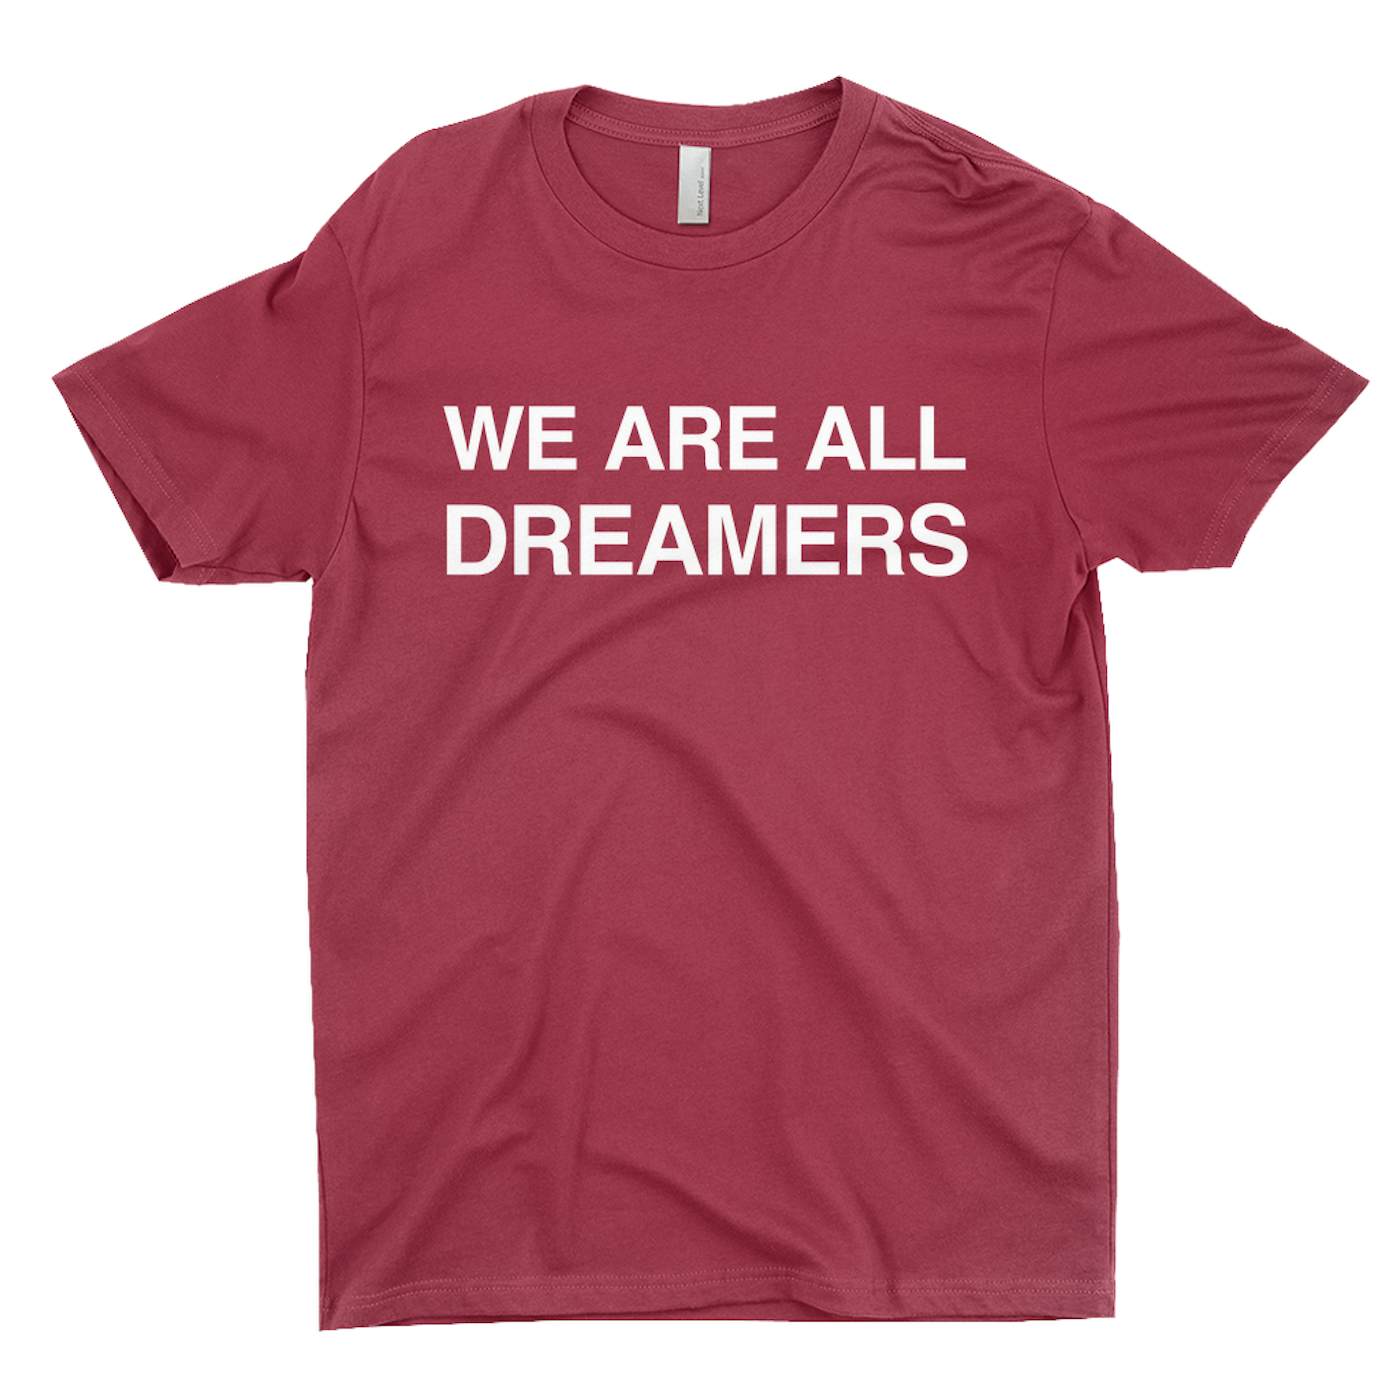 Selena Gomez T-Shirt | We Are All Dreamers Worn By Selena Gomez Selena Gomez Shirt